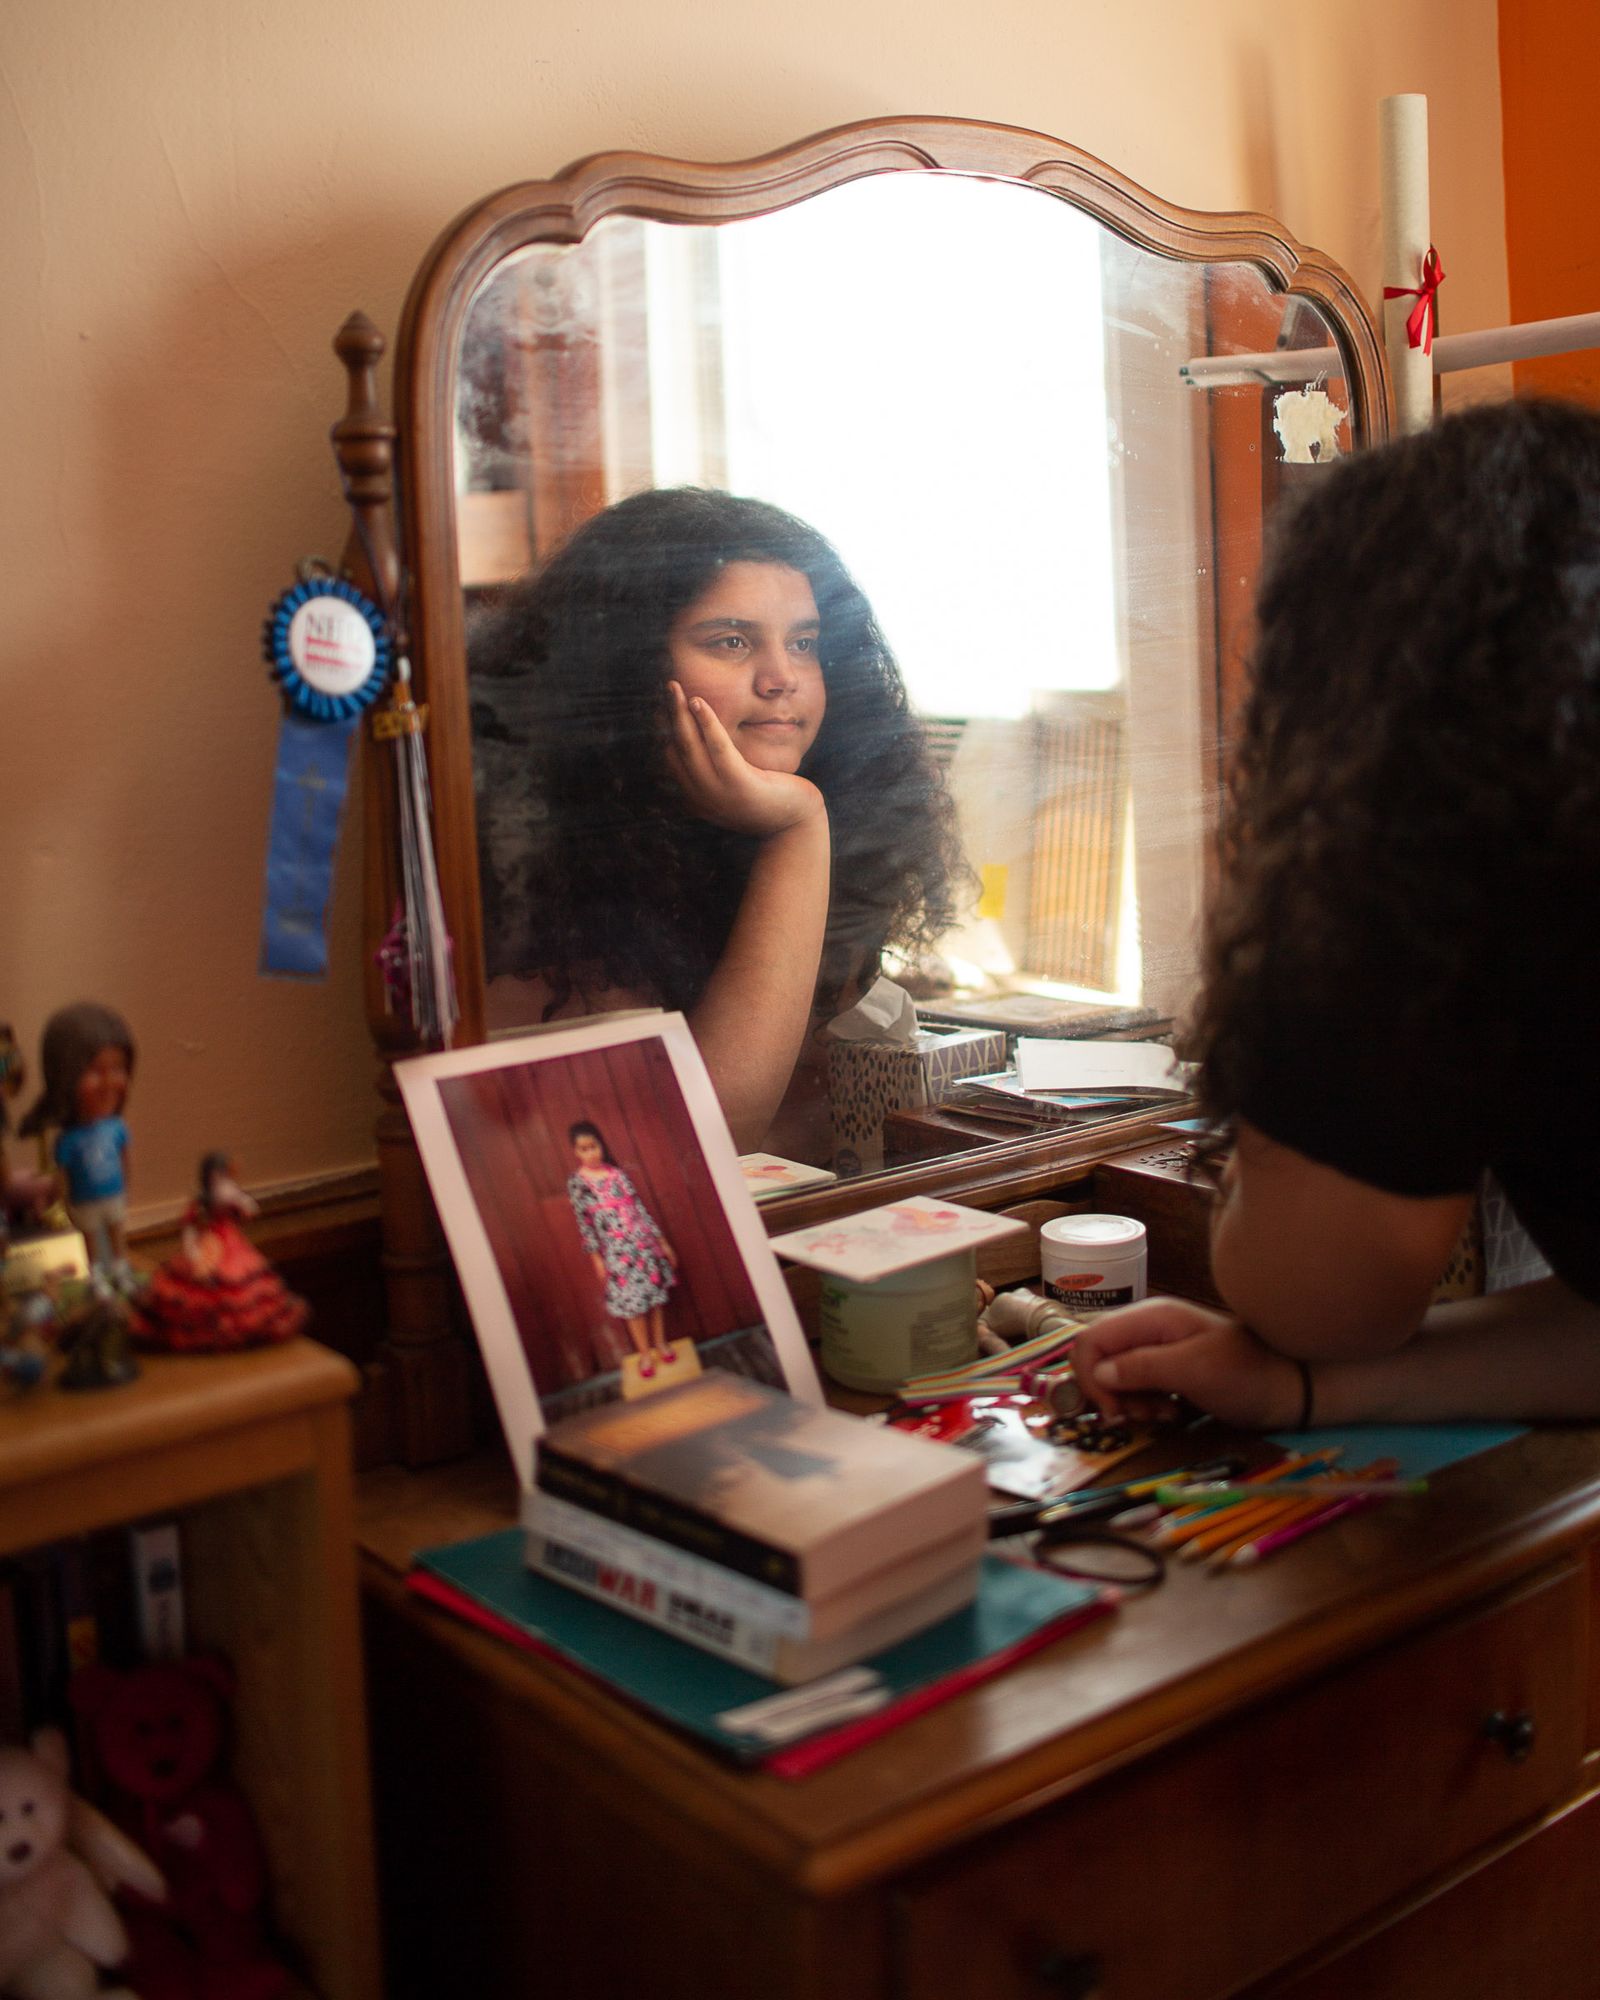 © Lindsay Morris - Tavish gazes in the mirror near a 2010 photo of her younger self at Camp I Am.